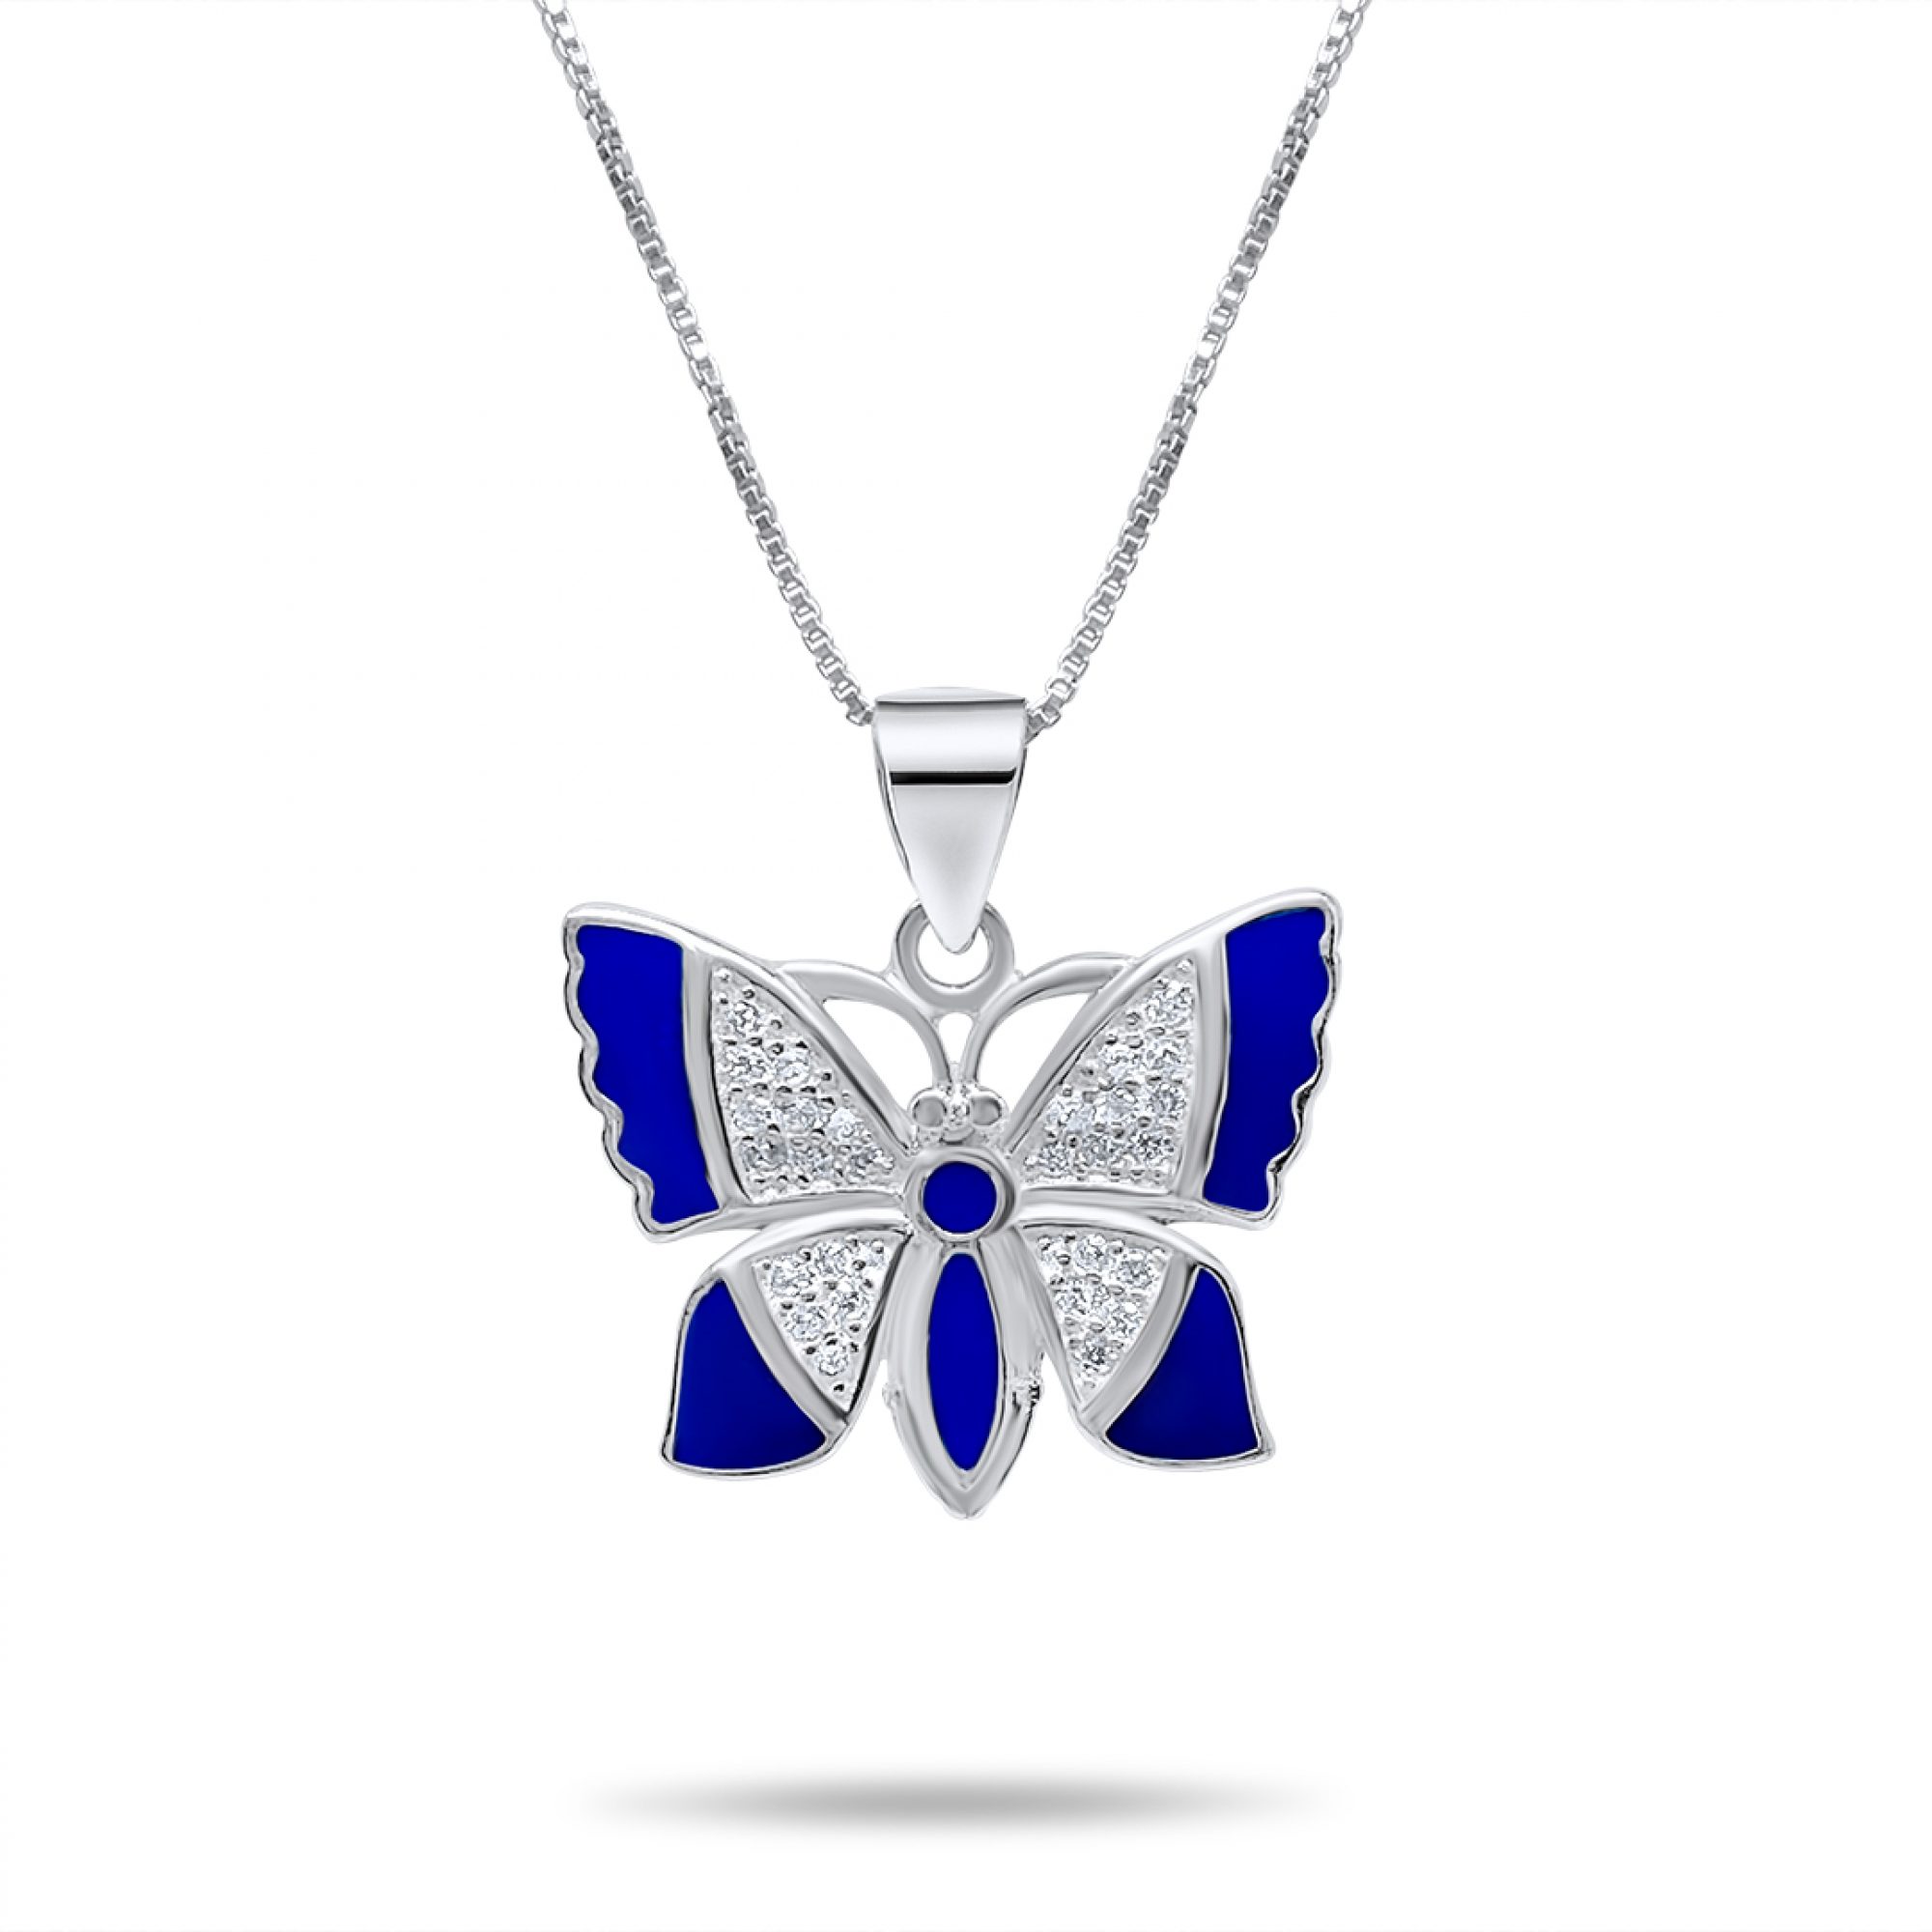 Butterfly necklace with zircon stones and enamel